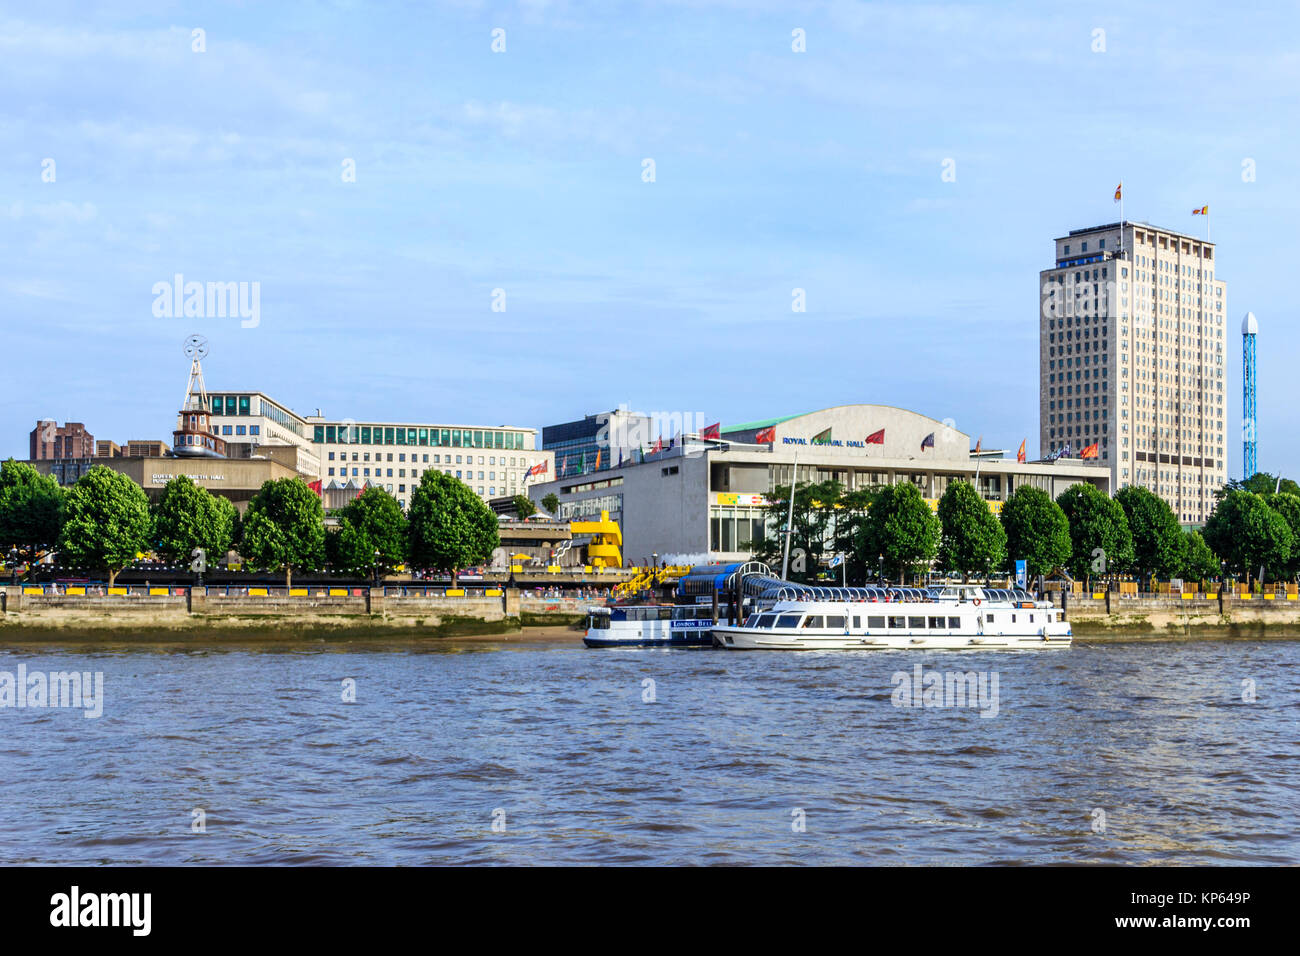 View of the Royal Festival Hall and Festival Pier across the River Thames fro Victoria Embankment, London, UK Stock Photo